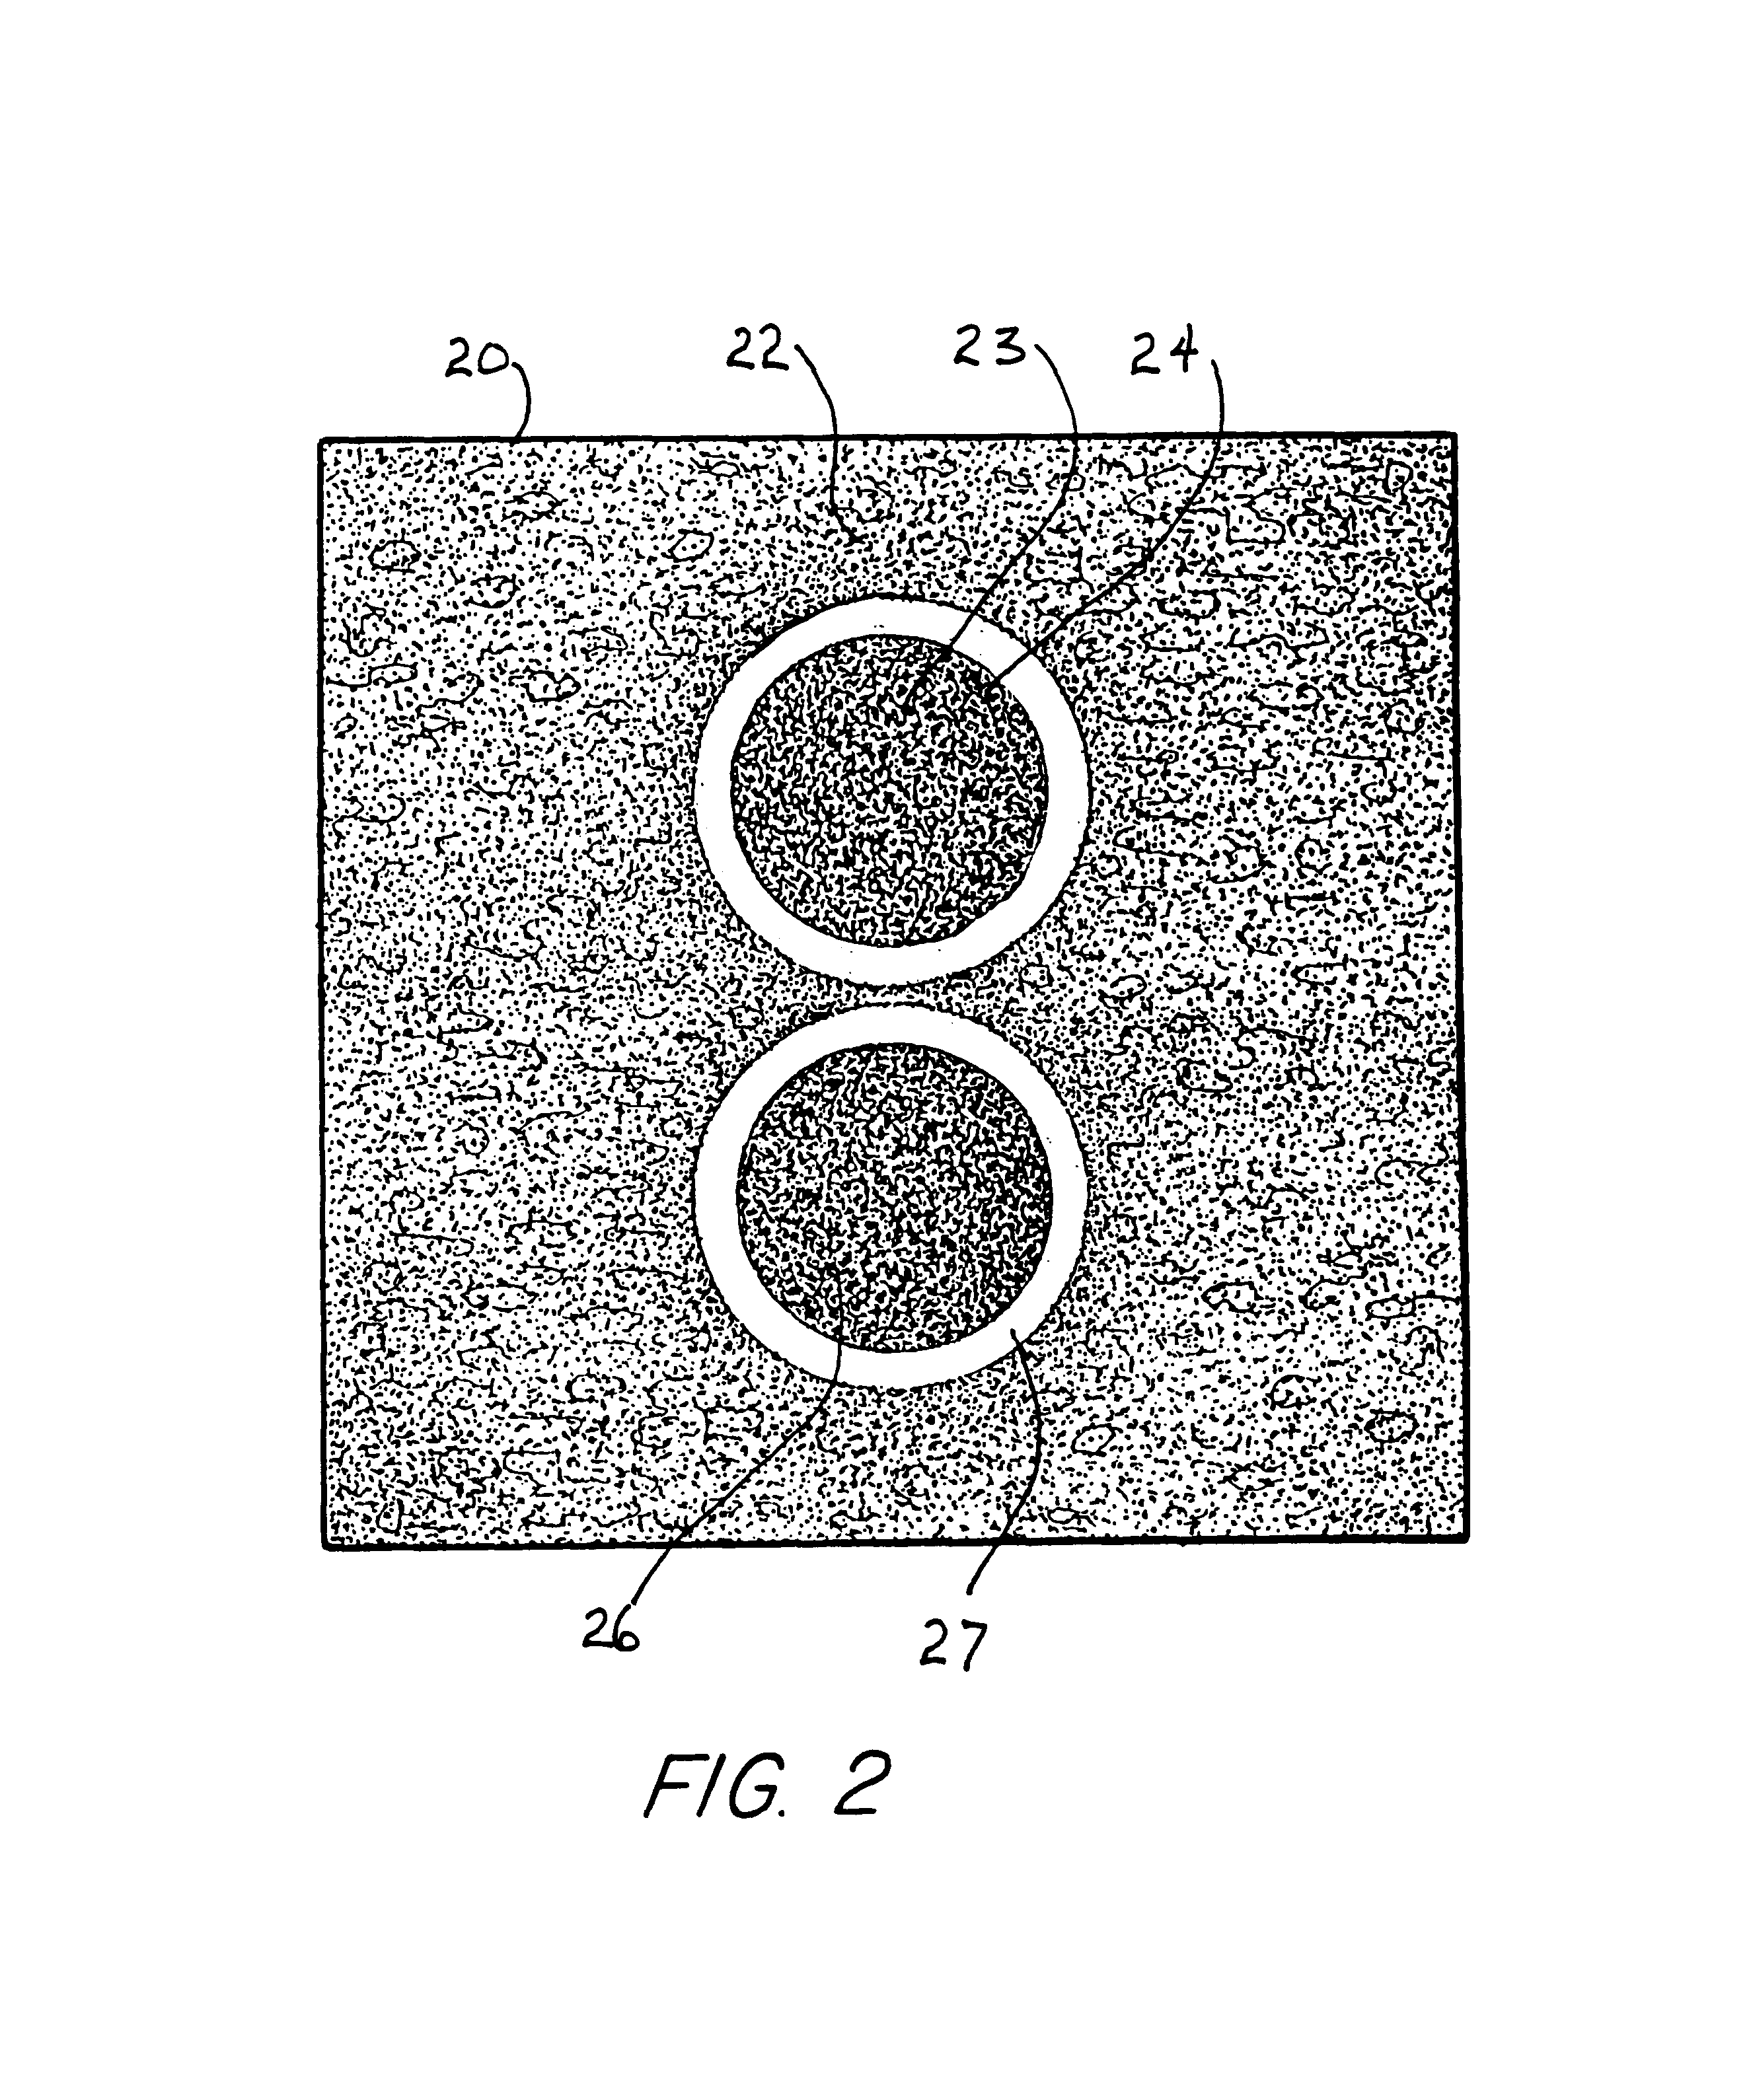 Split-screen display system and standardized methods for ultrasound image acquisition and processing for improved measurements of vascular structures